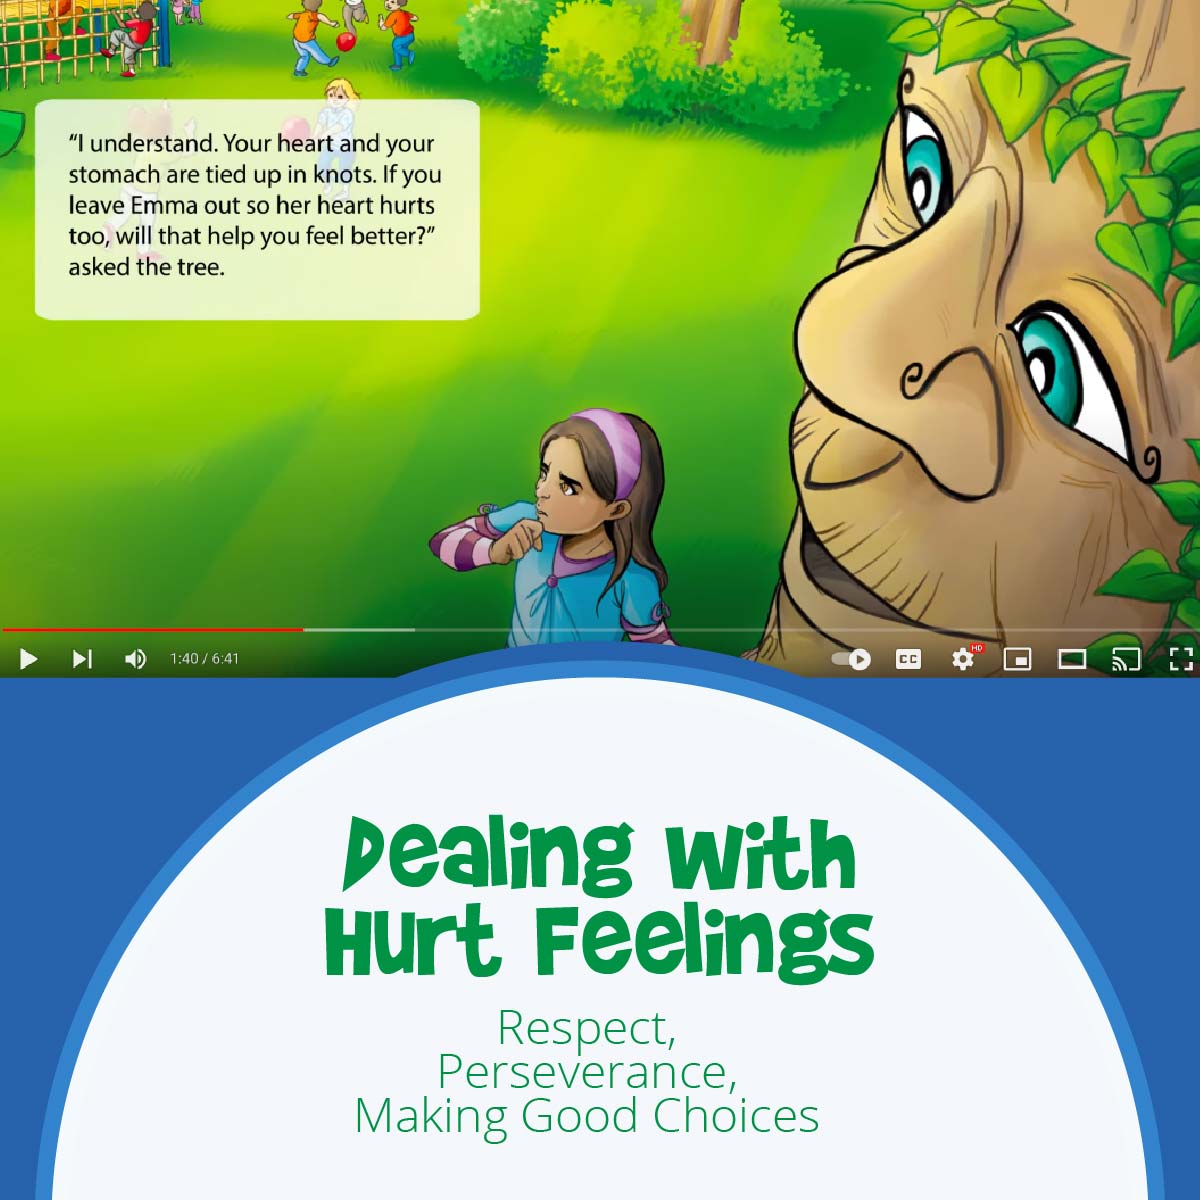 Social Emotional Learning Video of Book Be Bigger, on respect in friendship, perseverance